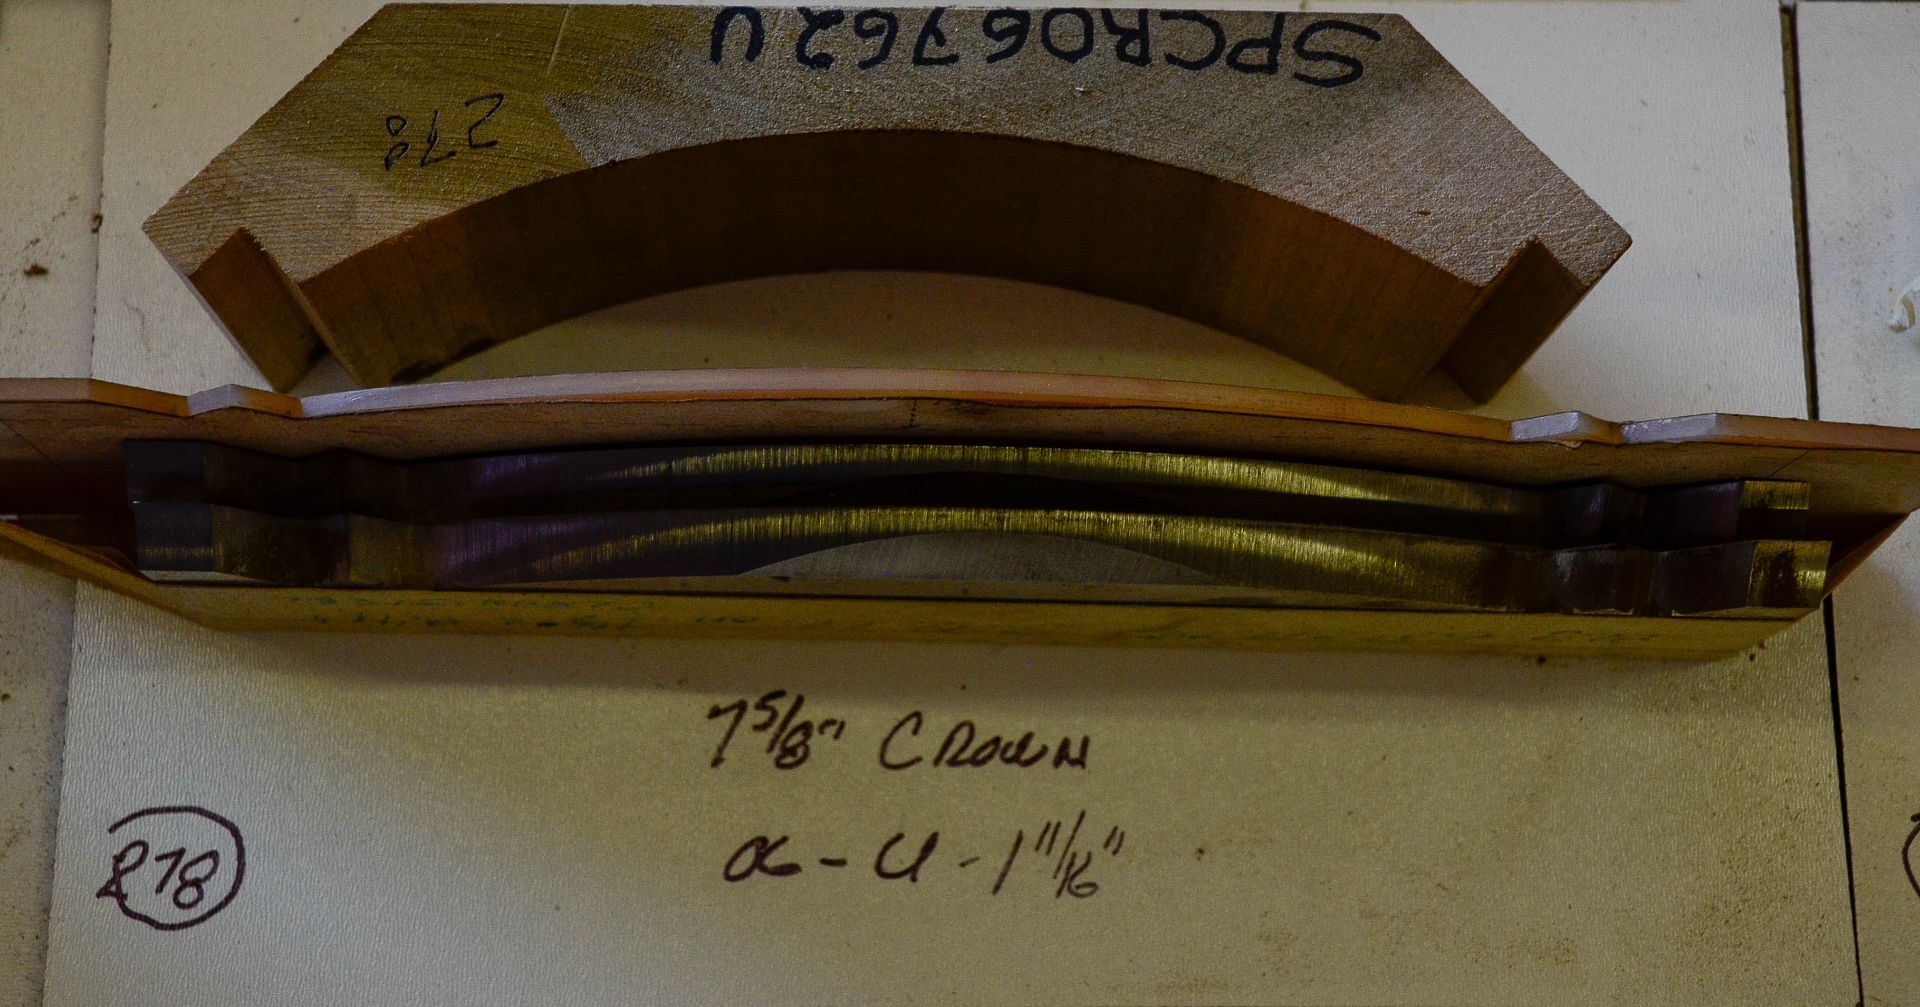 Moulding Knives, 7-5/8" Crown, 06 - U = 1-11/16", Knives are in Good Condition and Ready to Use ( - Image 2 of 2